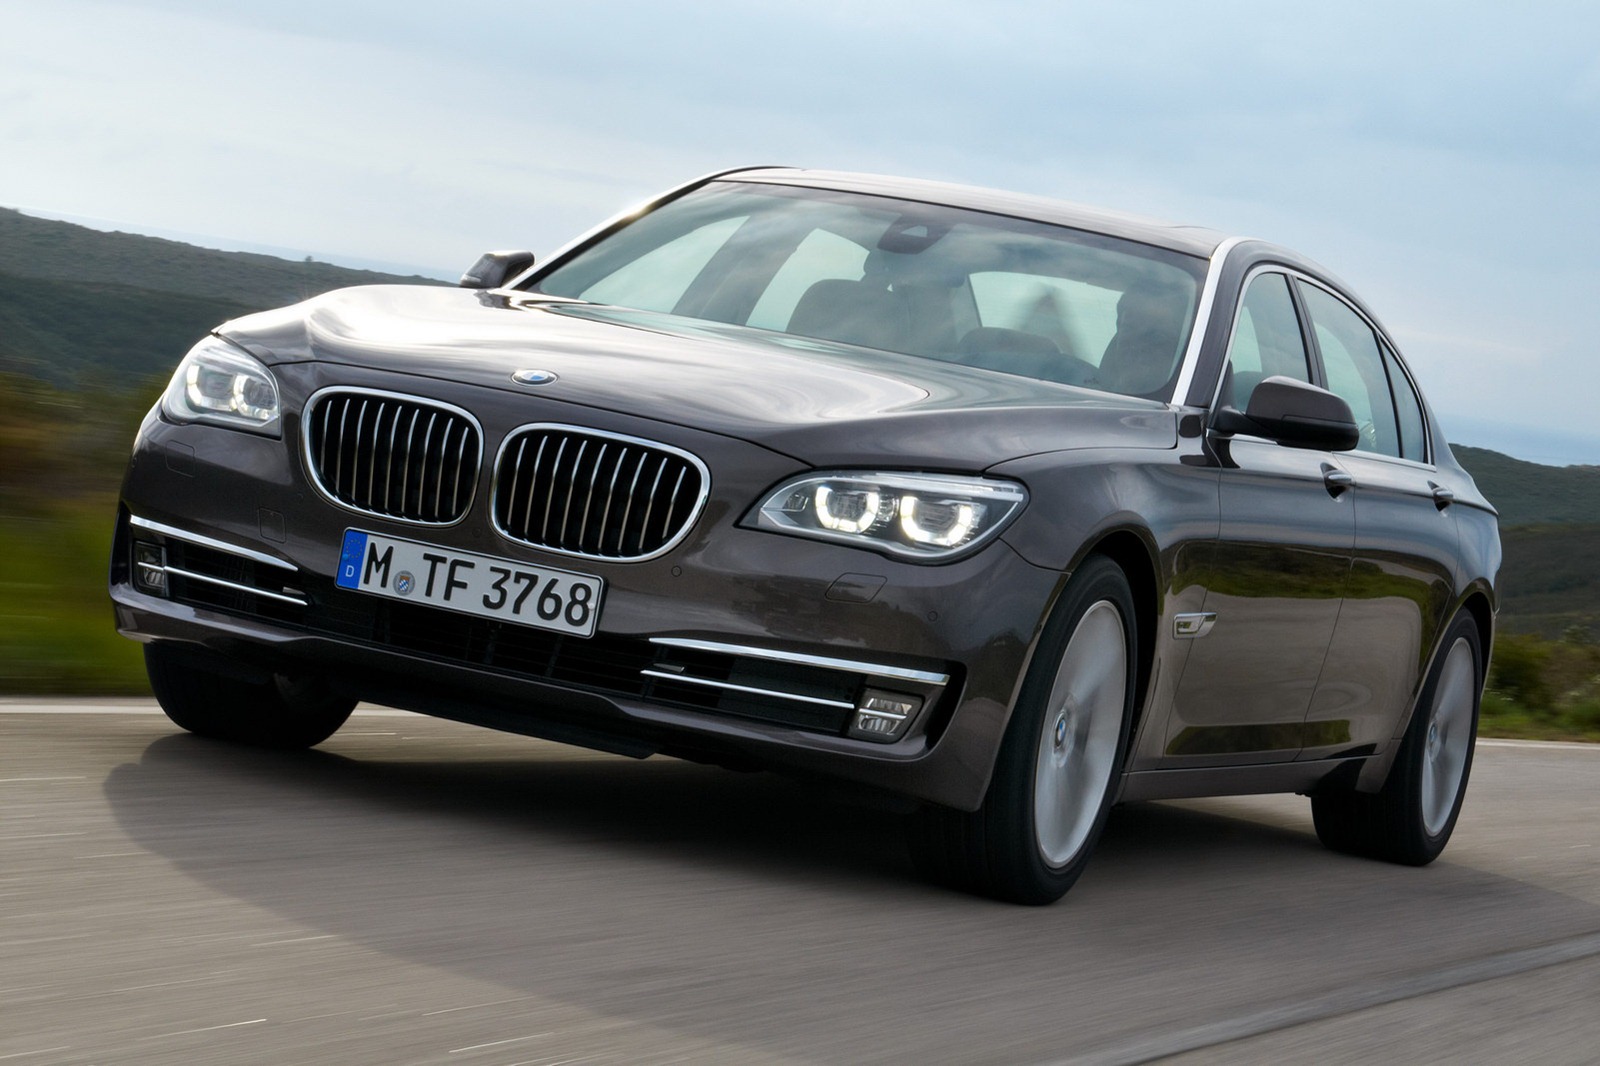 About 2013 BMW 7Series